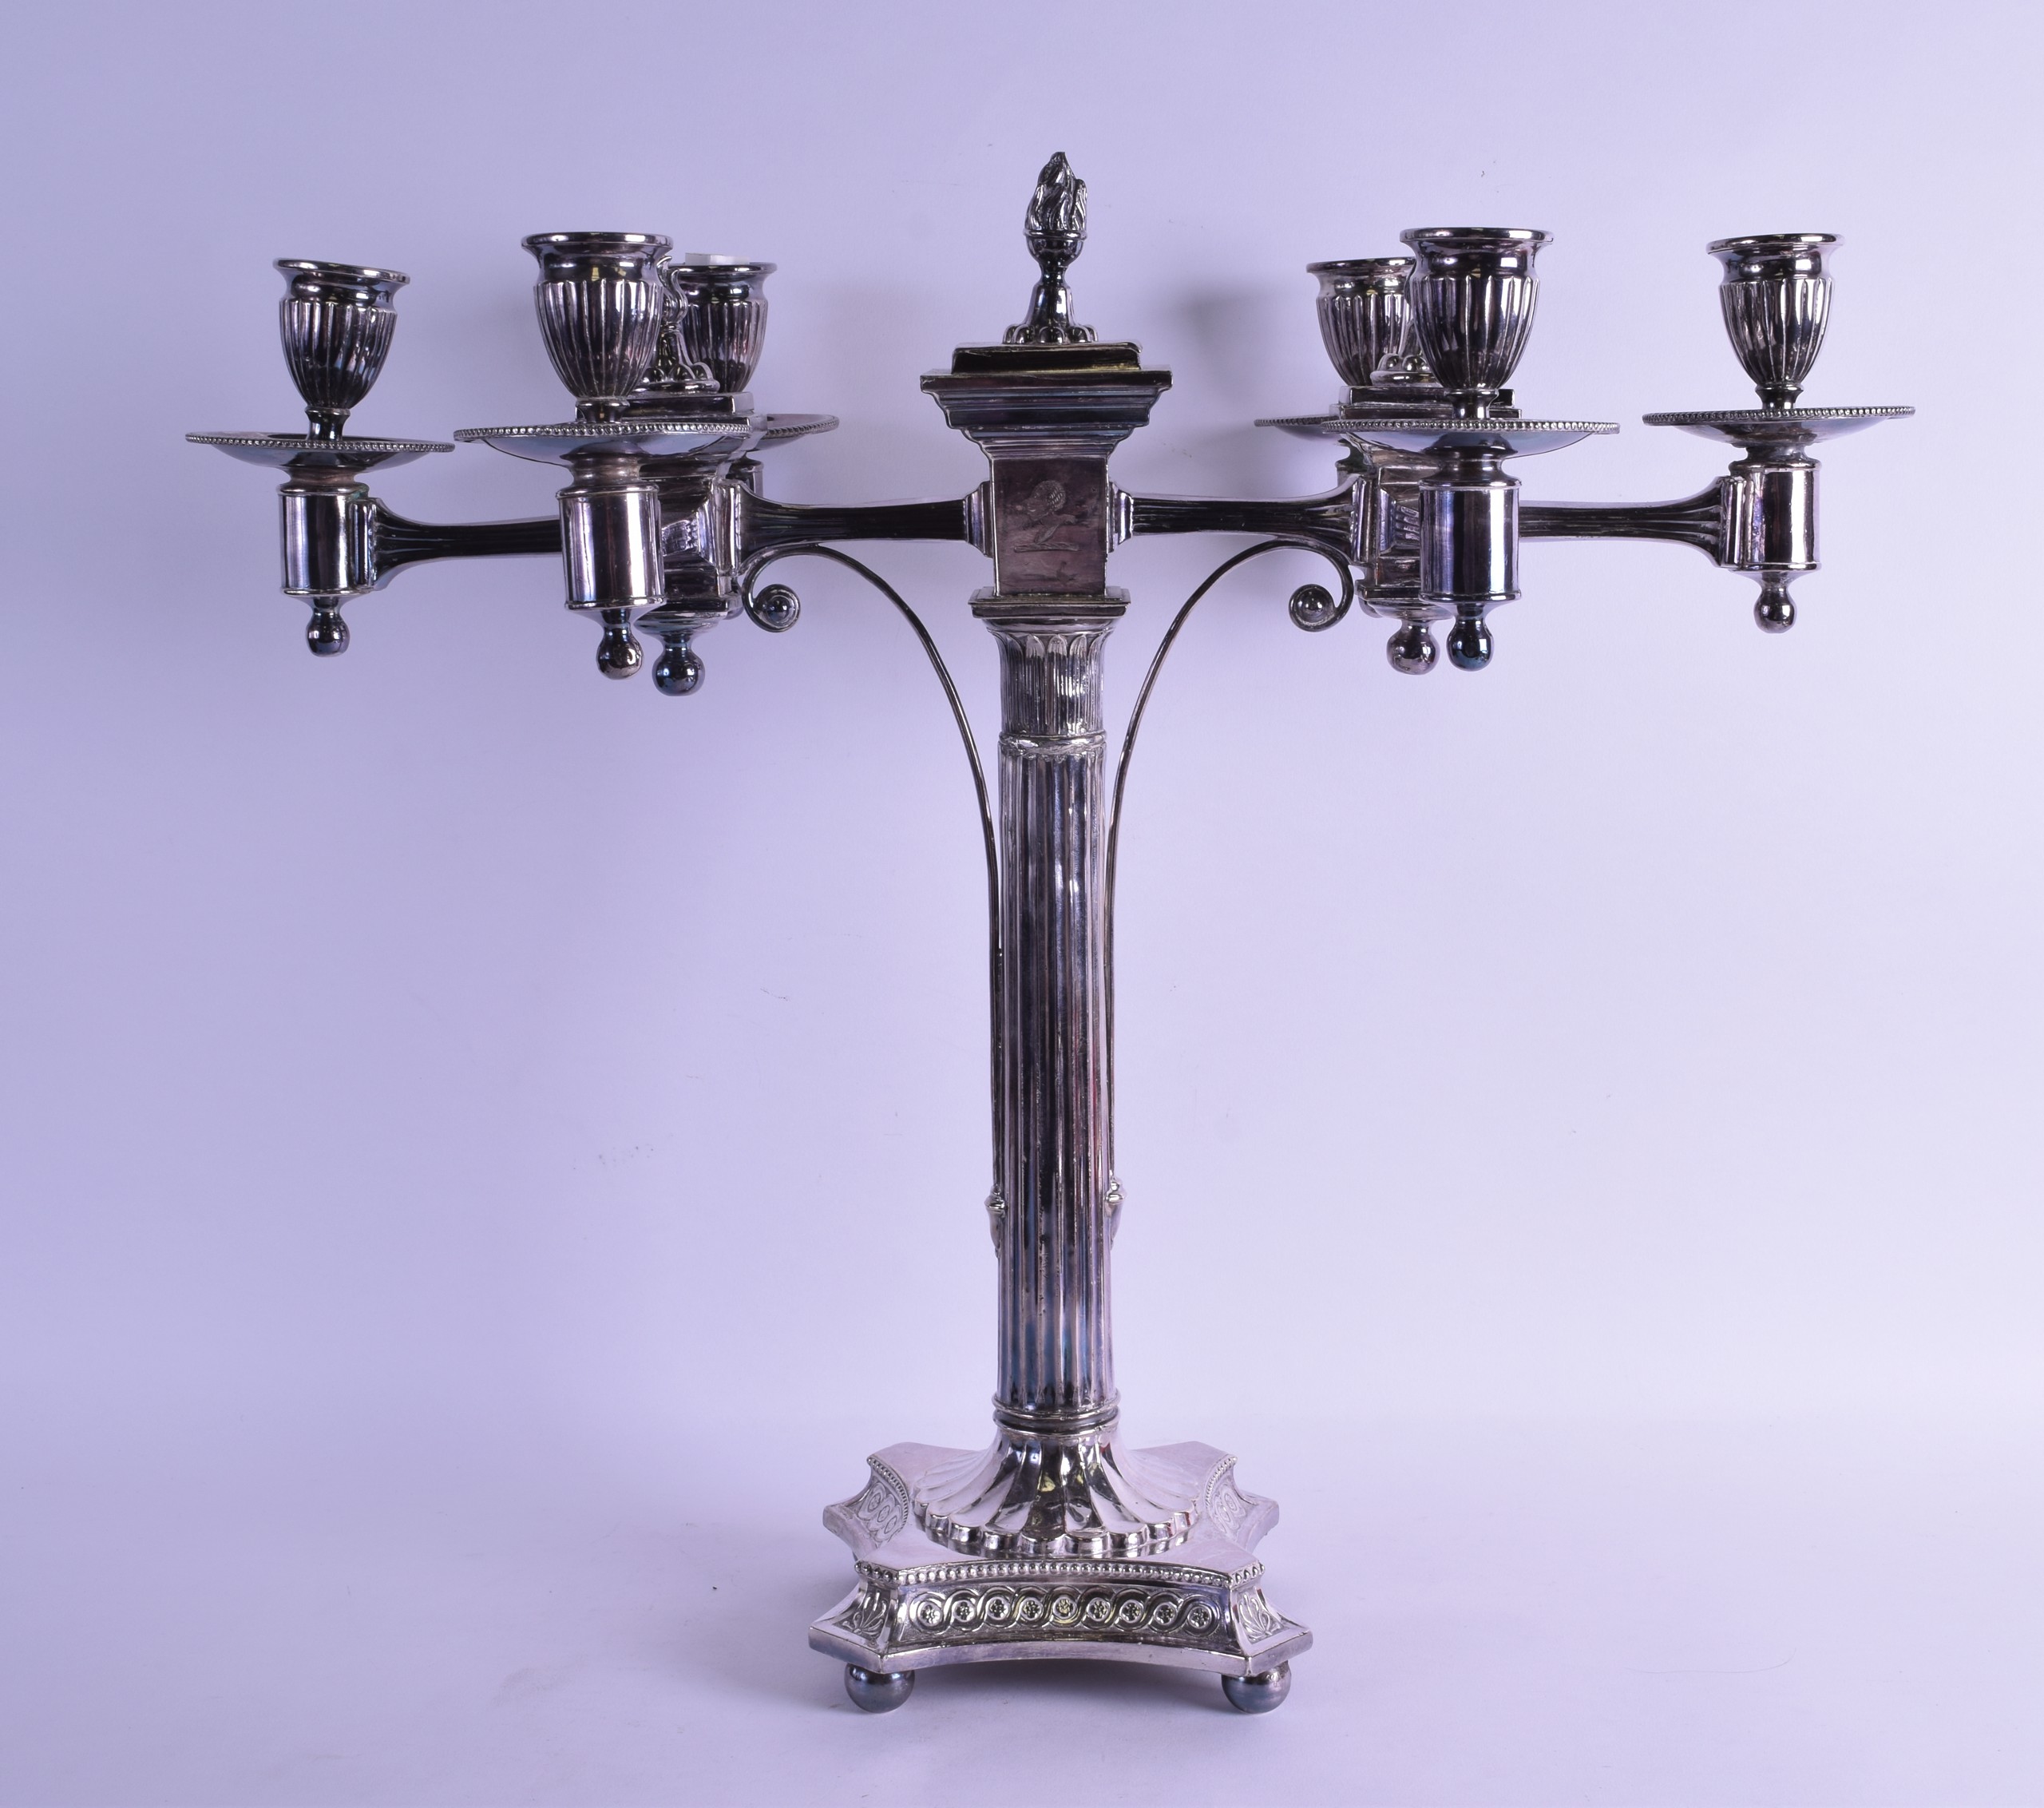 A RARE MID 19TH CENTURY IMPOSING SIX LIGHT CANDLEABRA in the Adams style, with six lights set in a